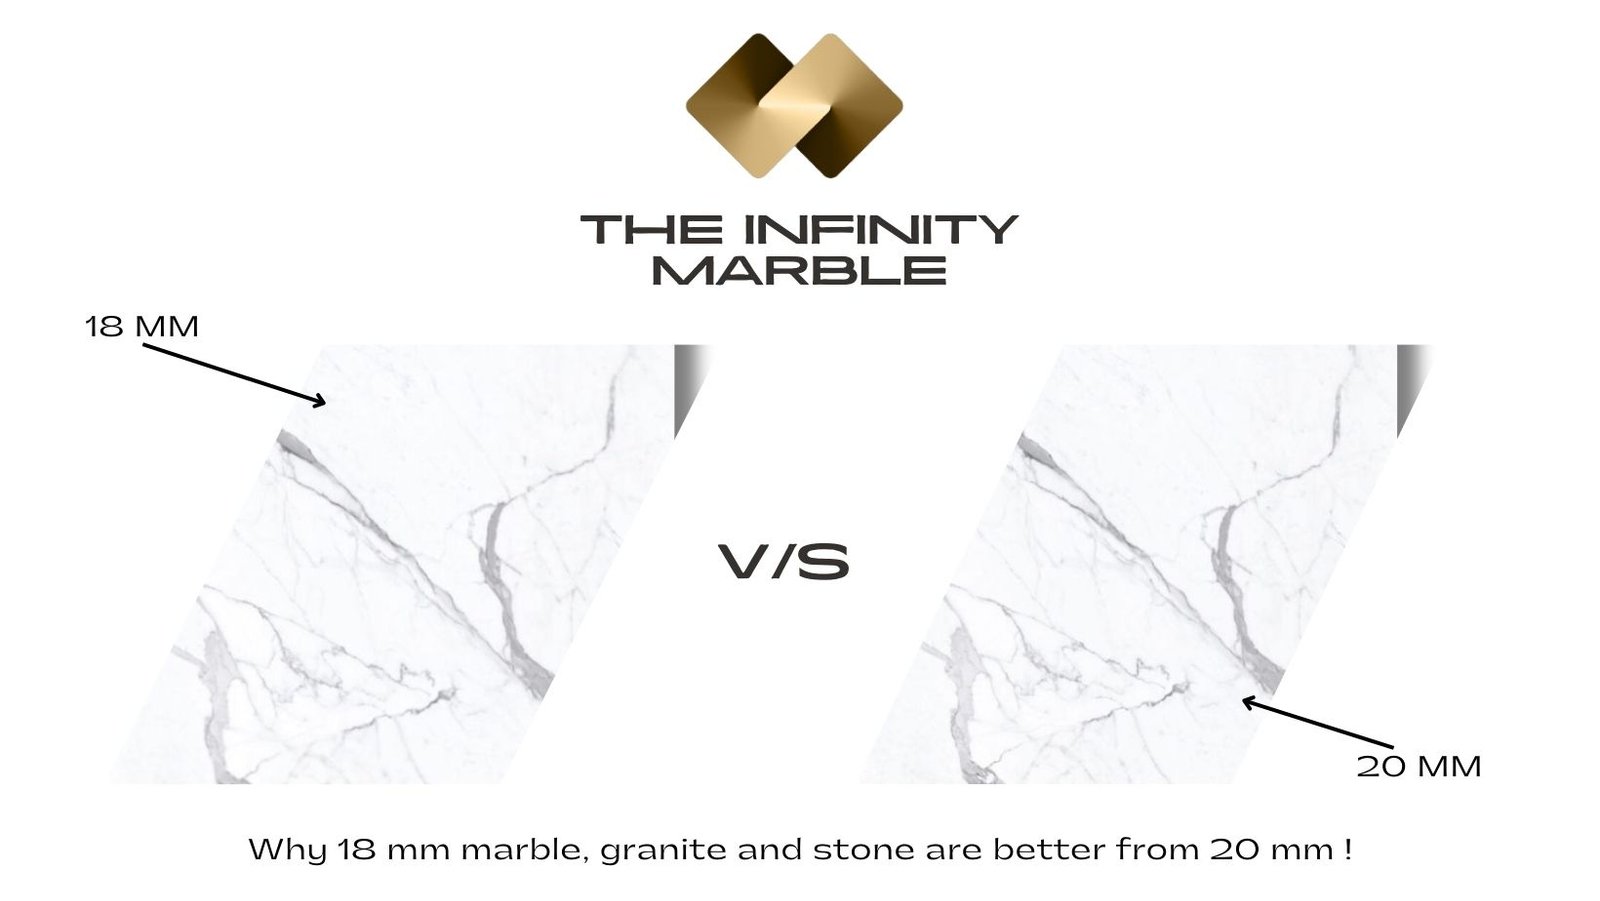 Why 18 mm marble, granite and stone are better from 20 mm